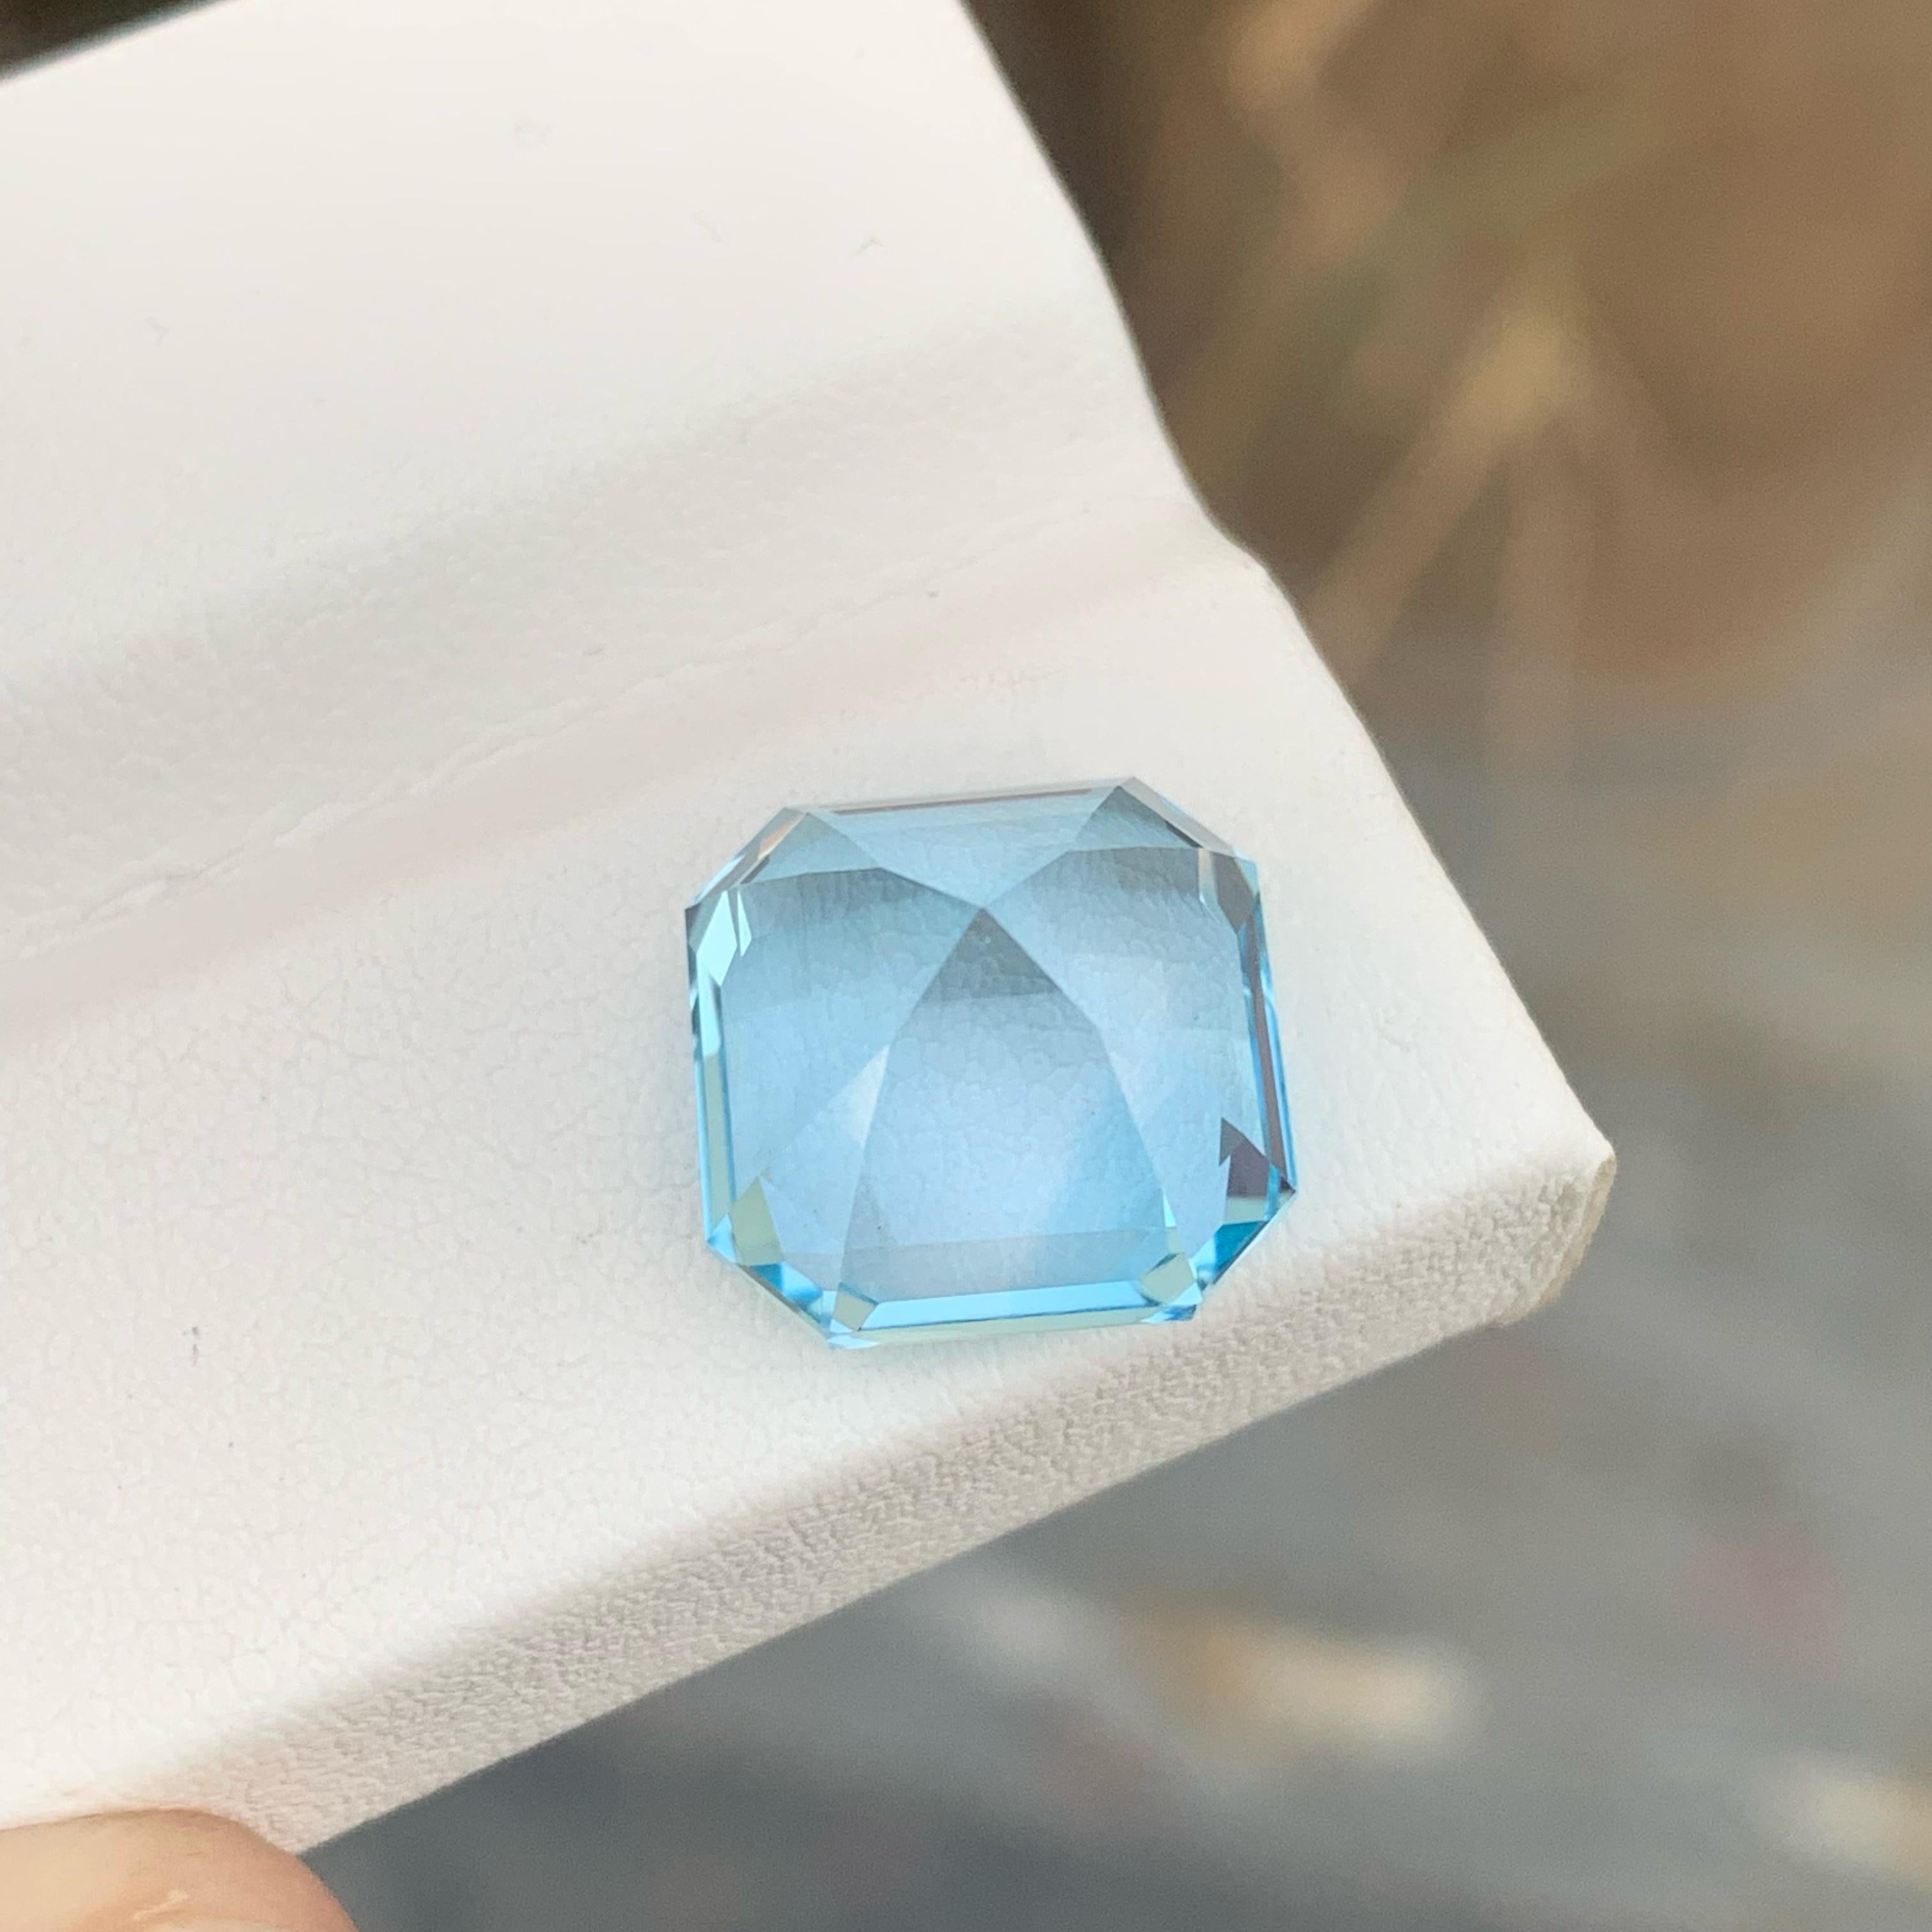 Weight 12.80 carats 
Dimensions 12.6 x 12.6 x 9.5 mm
Treatment Heated 
Origin Madagascar 
Clarity Eye Clean 
Shape Octagon 
Cut Asscher 



Elevate your jewelry collection with the timeless beauty of this natural Swiss Blue Topaz gemstone. At an